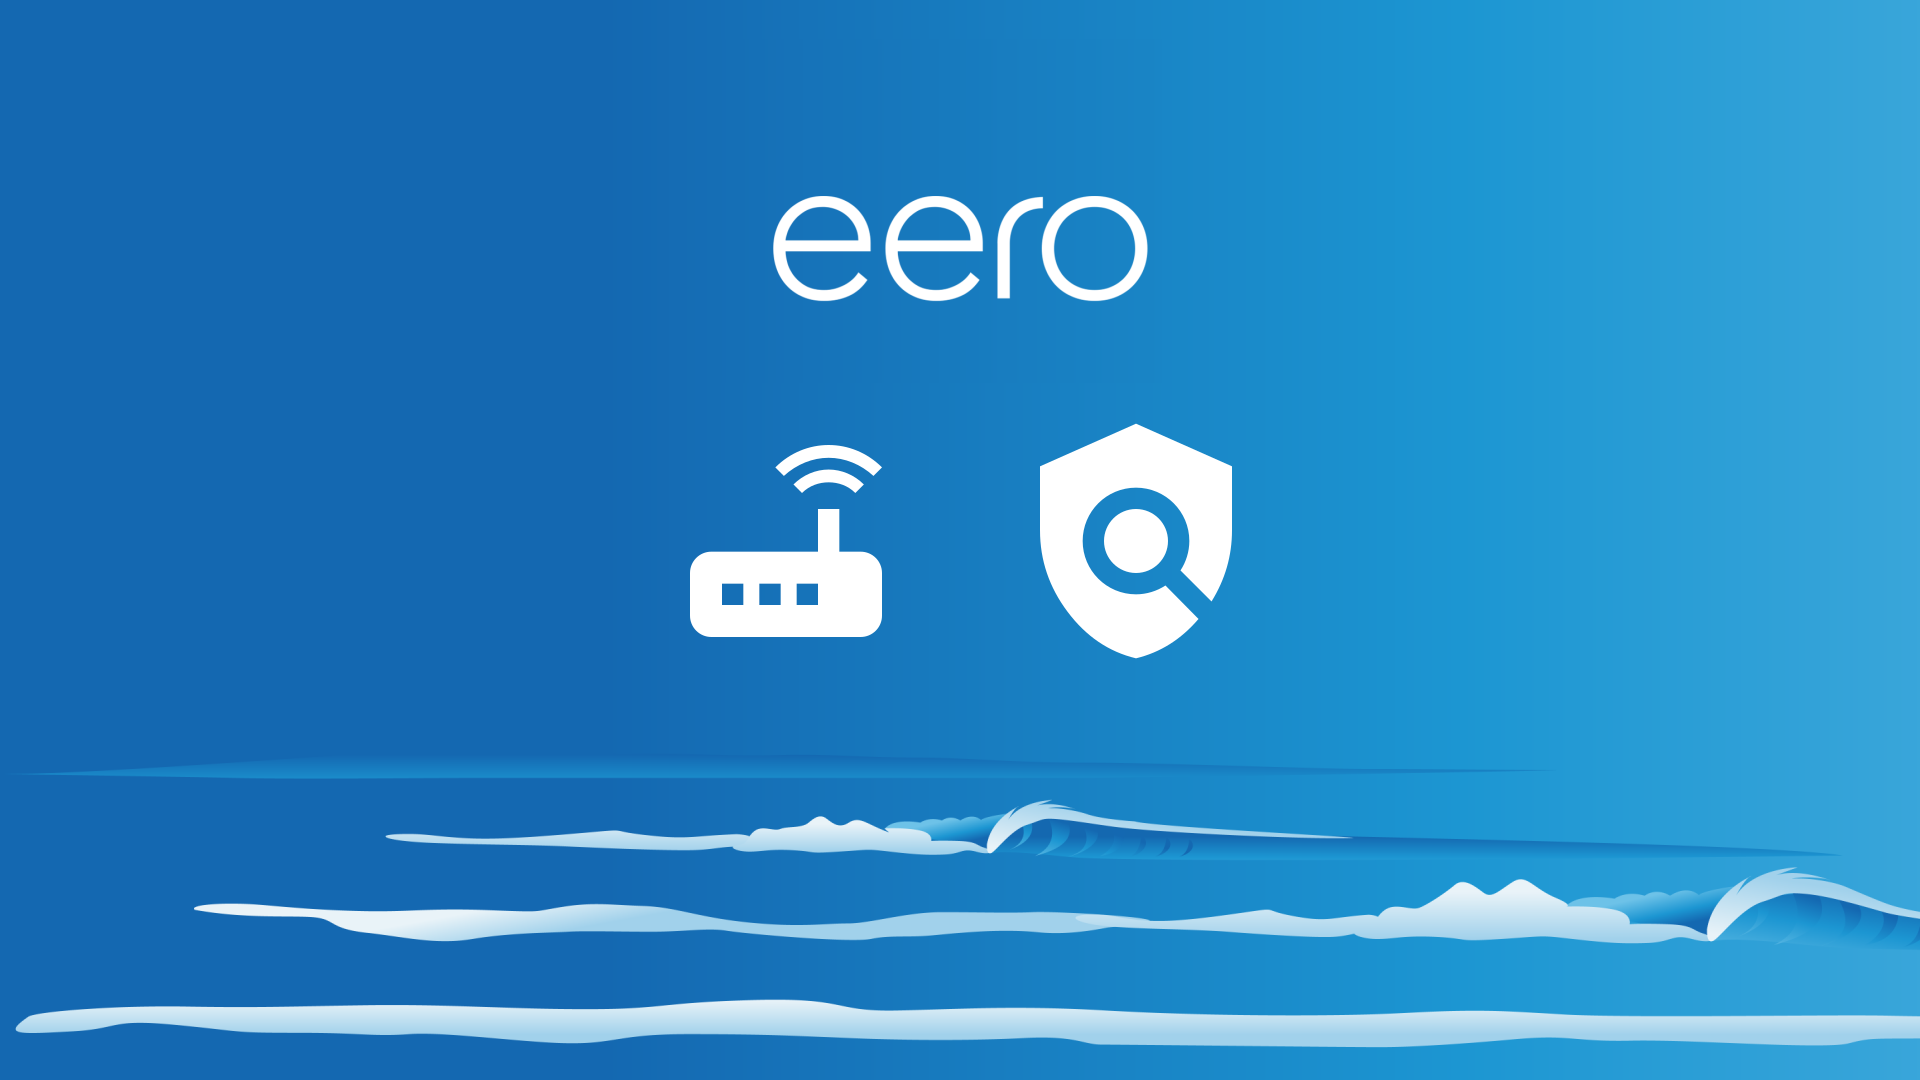 Sea background with eero logo and wireless router icon